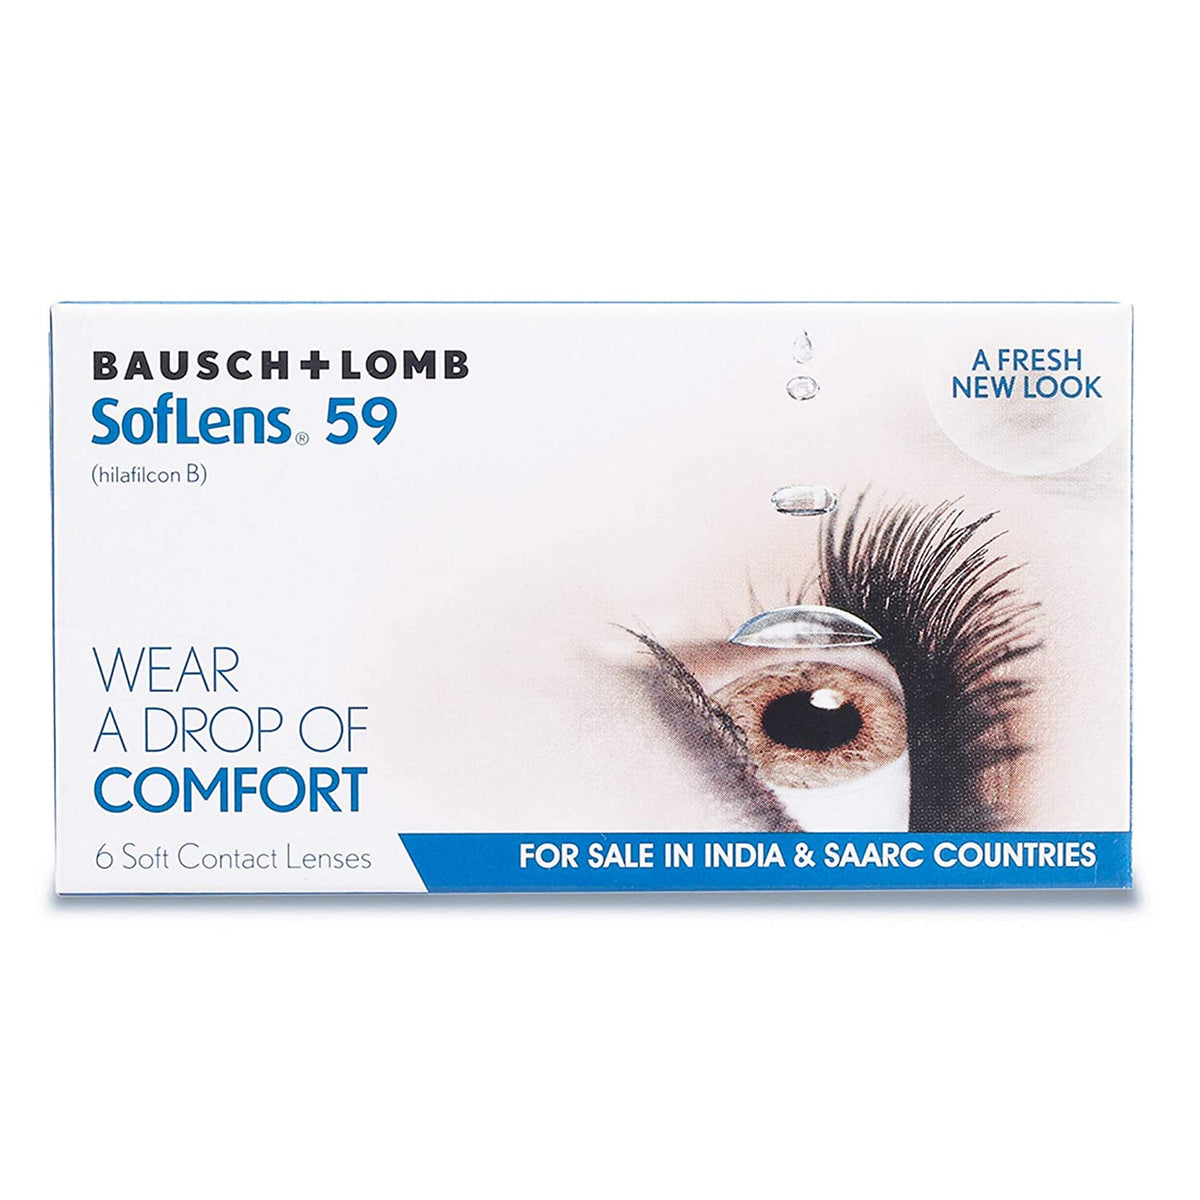 Spherical Contact Lenses